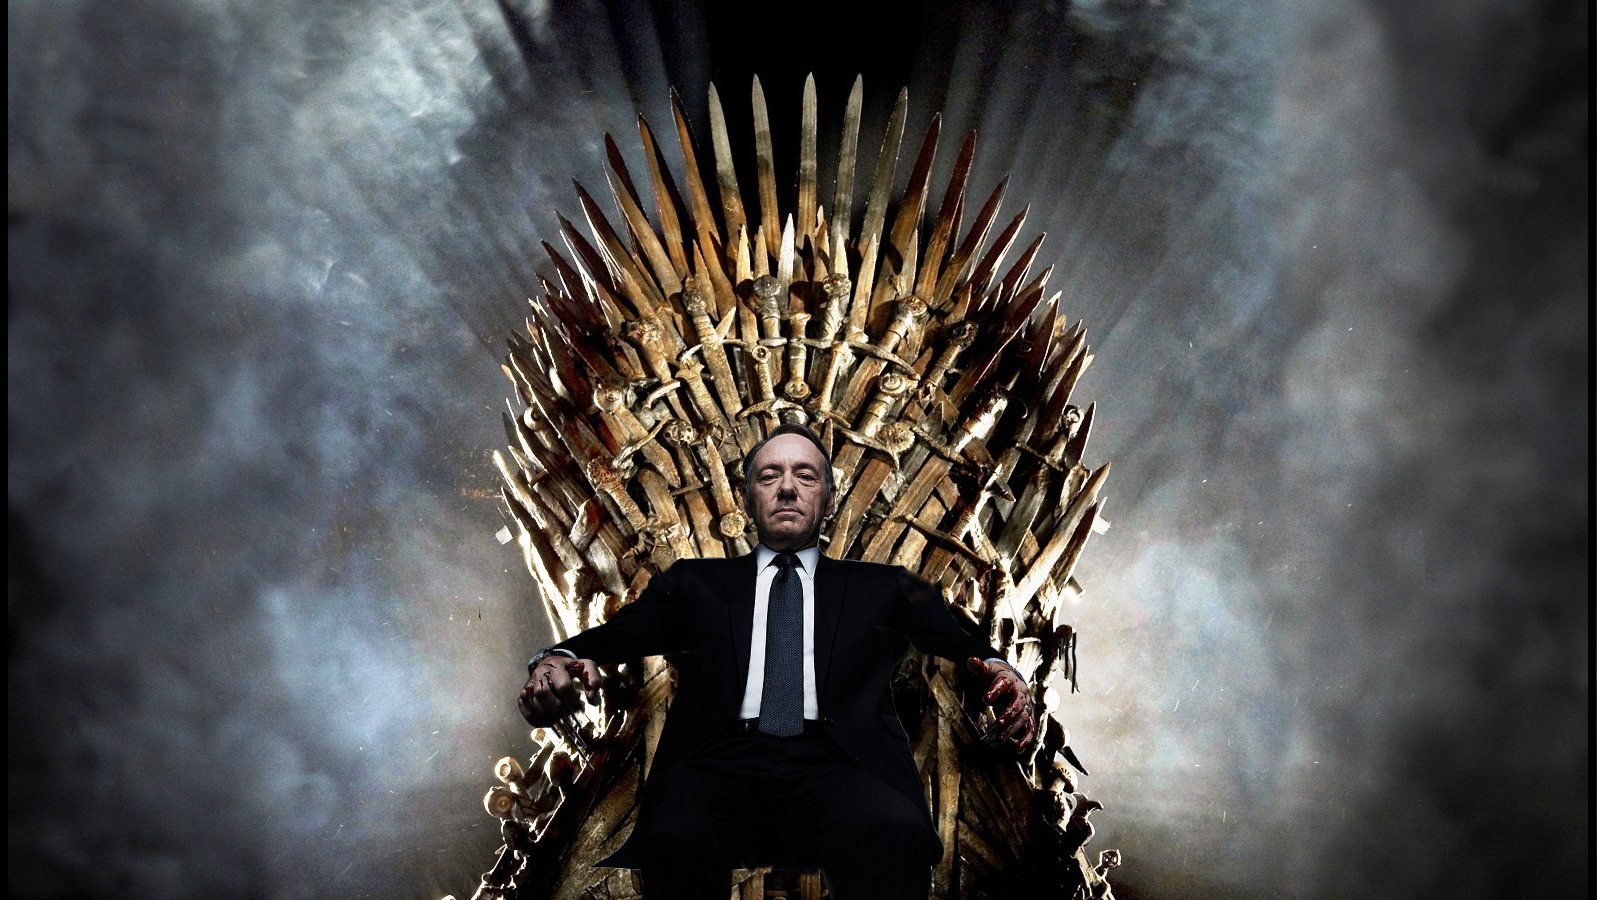 Game Of Thrones, Kevin Spacey, House Of Cards, Crossover, Iron Throne Wallpaper